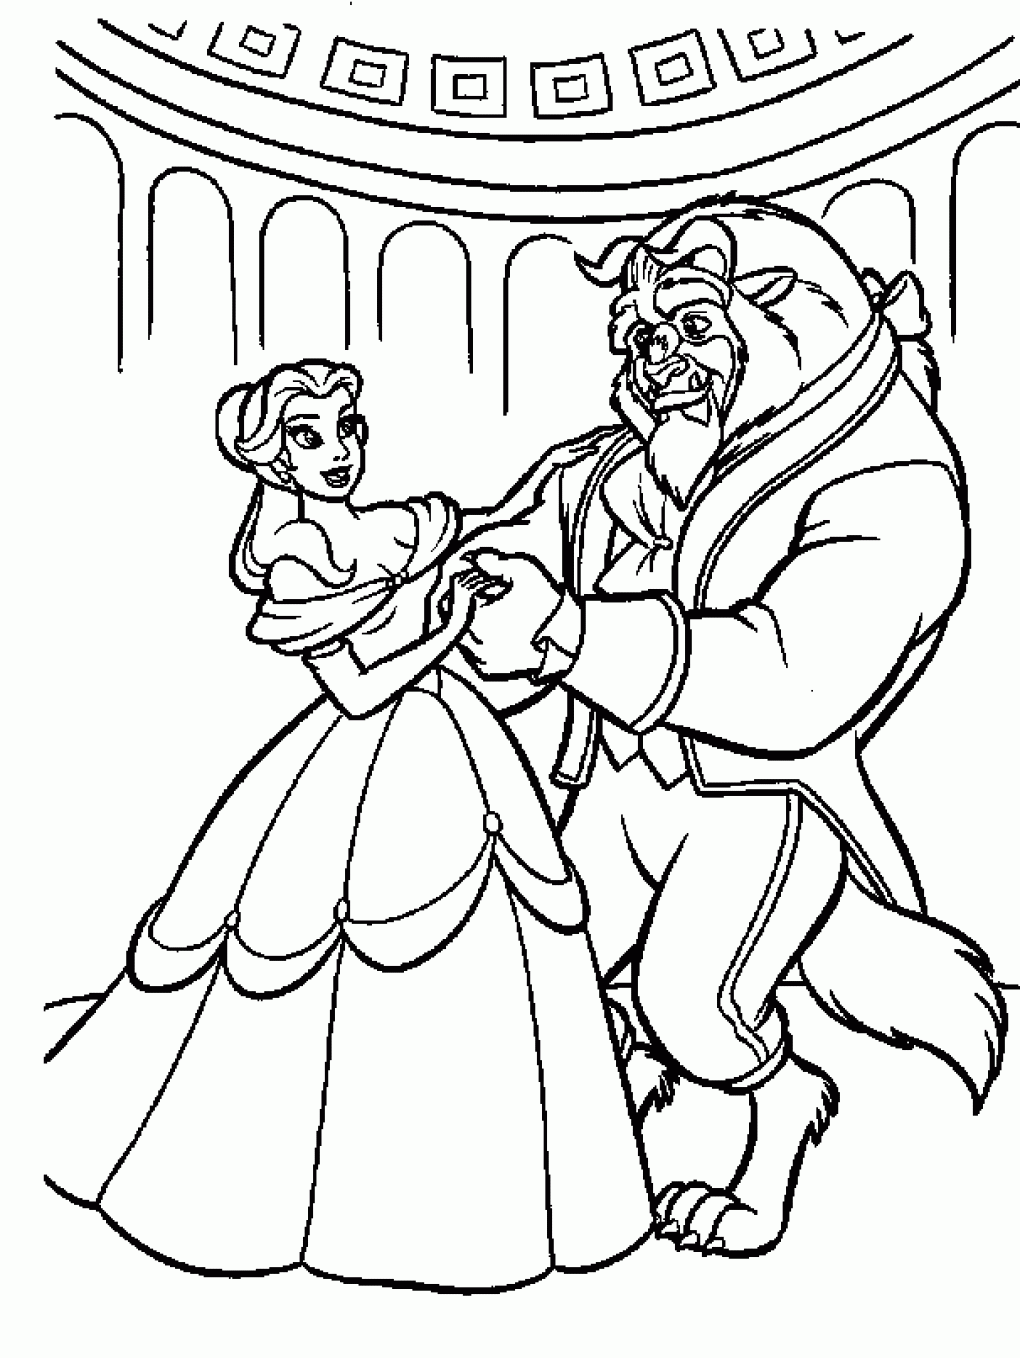 beauty and the beast pictures to colour beauty and the beast coloring pages 3 disneyclipscom to colour beauty and beast pictures the 